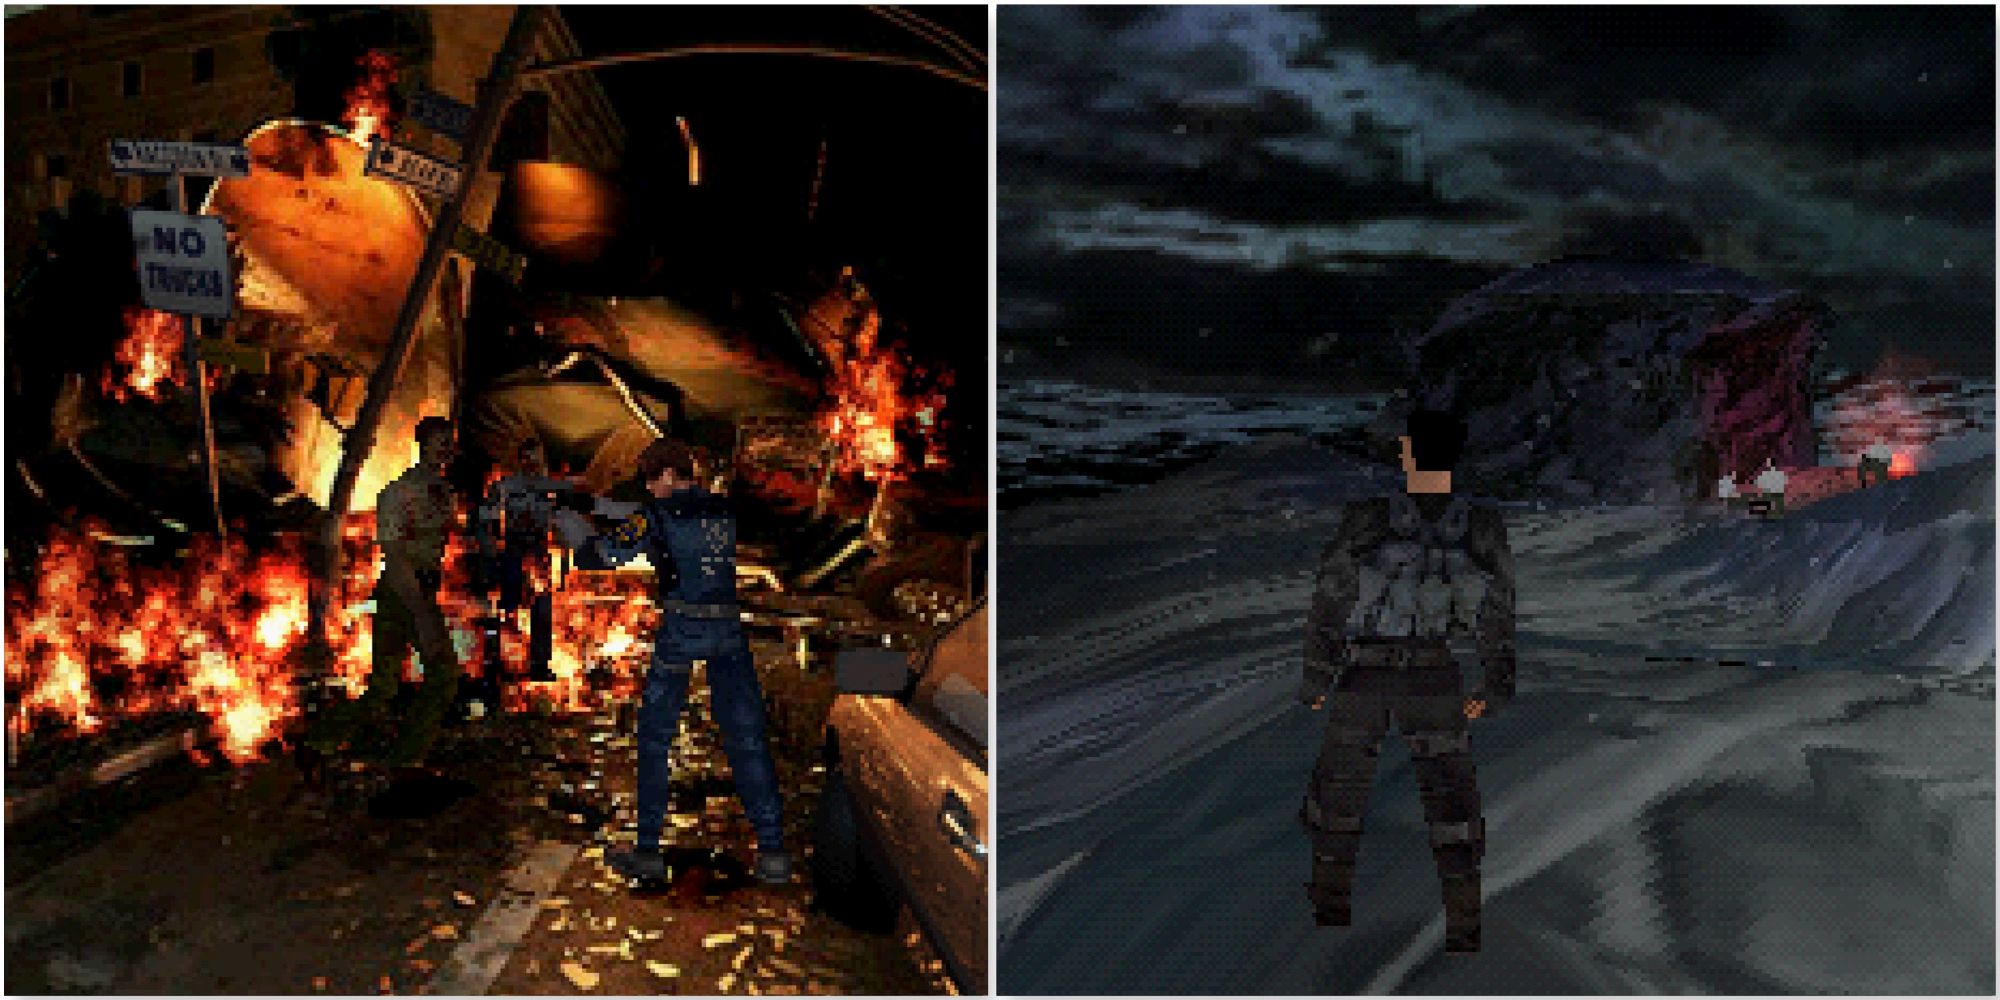 Shooting zombies in Resident Evil 2 and Exploring a mountain in Syphon Filter 2